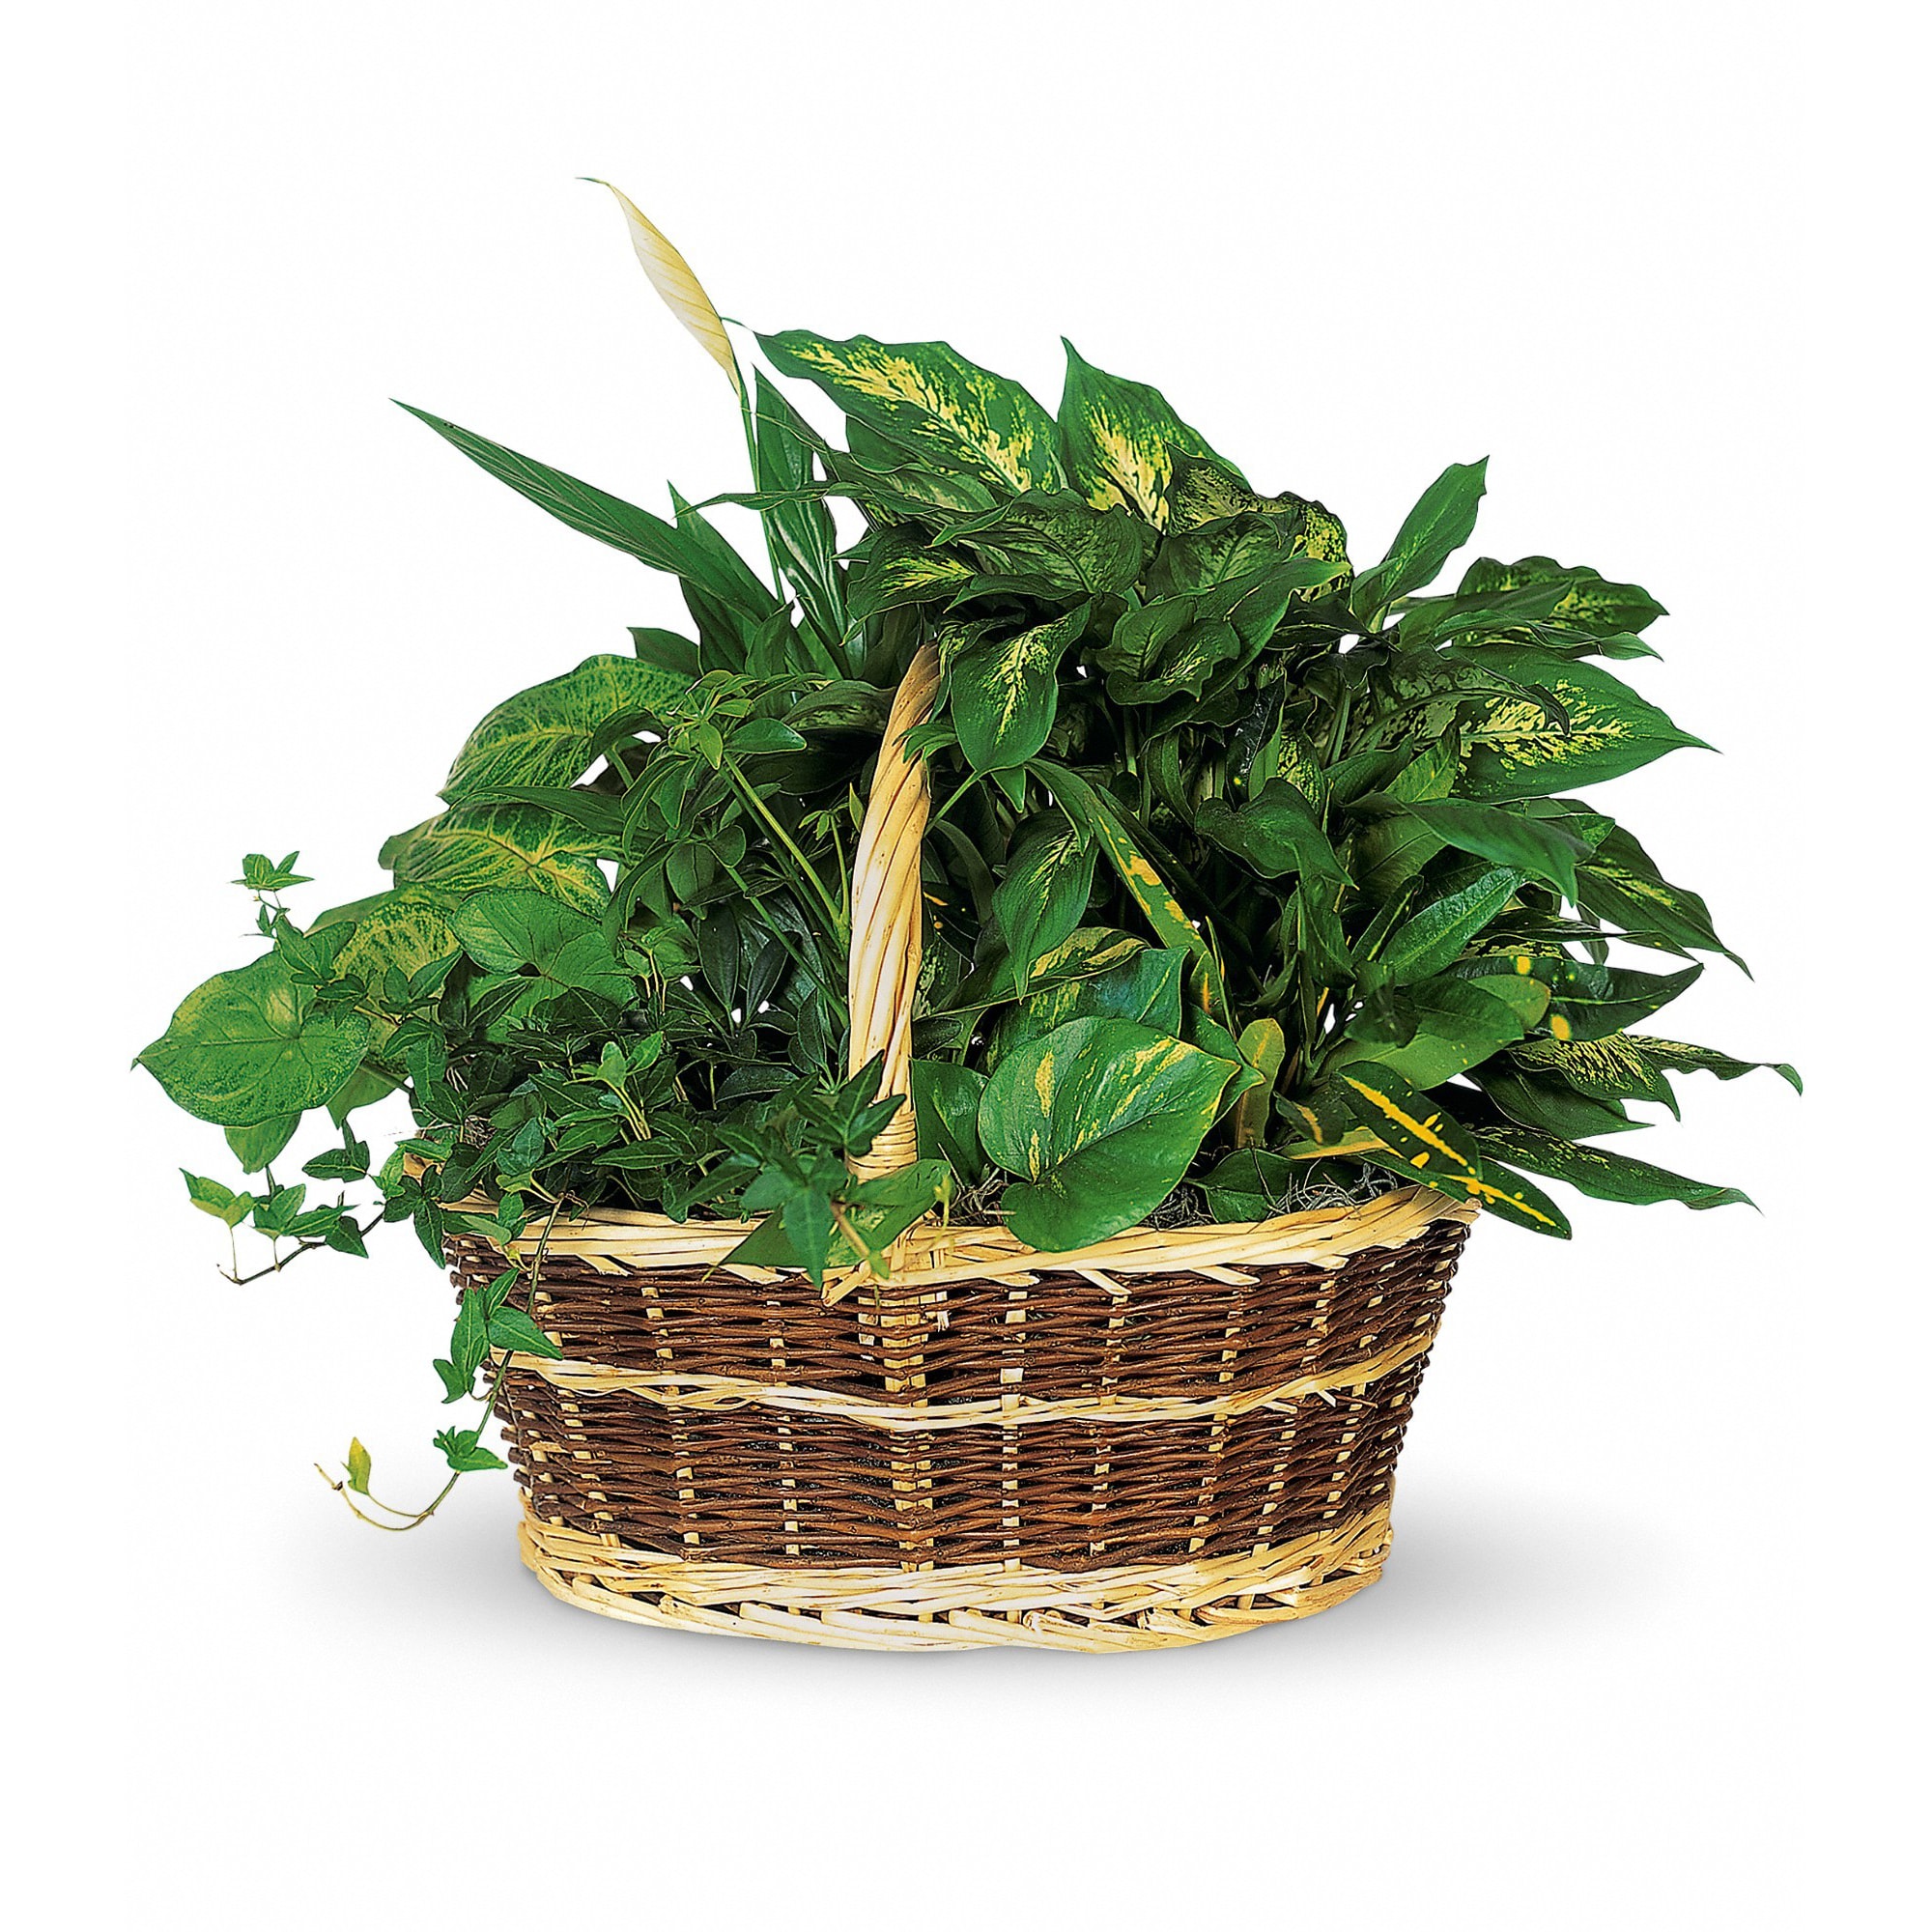 Large Basket Garden - This impressive garden of indoor plants will be a warm welcome to any home or office. And you'll get glowing reviews for sending it.    Croton, ivy, pothos, dieffenbachia, schefflera and syngonium plants arrive together in a wicker basket with handle.    Approximately 19&quot; W x 16&quot; H    Orientation: All-Around        As Shown : T212-1A      